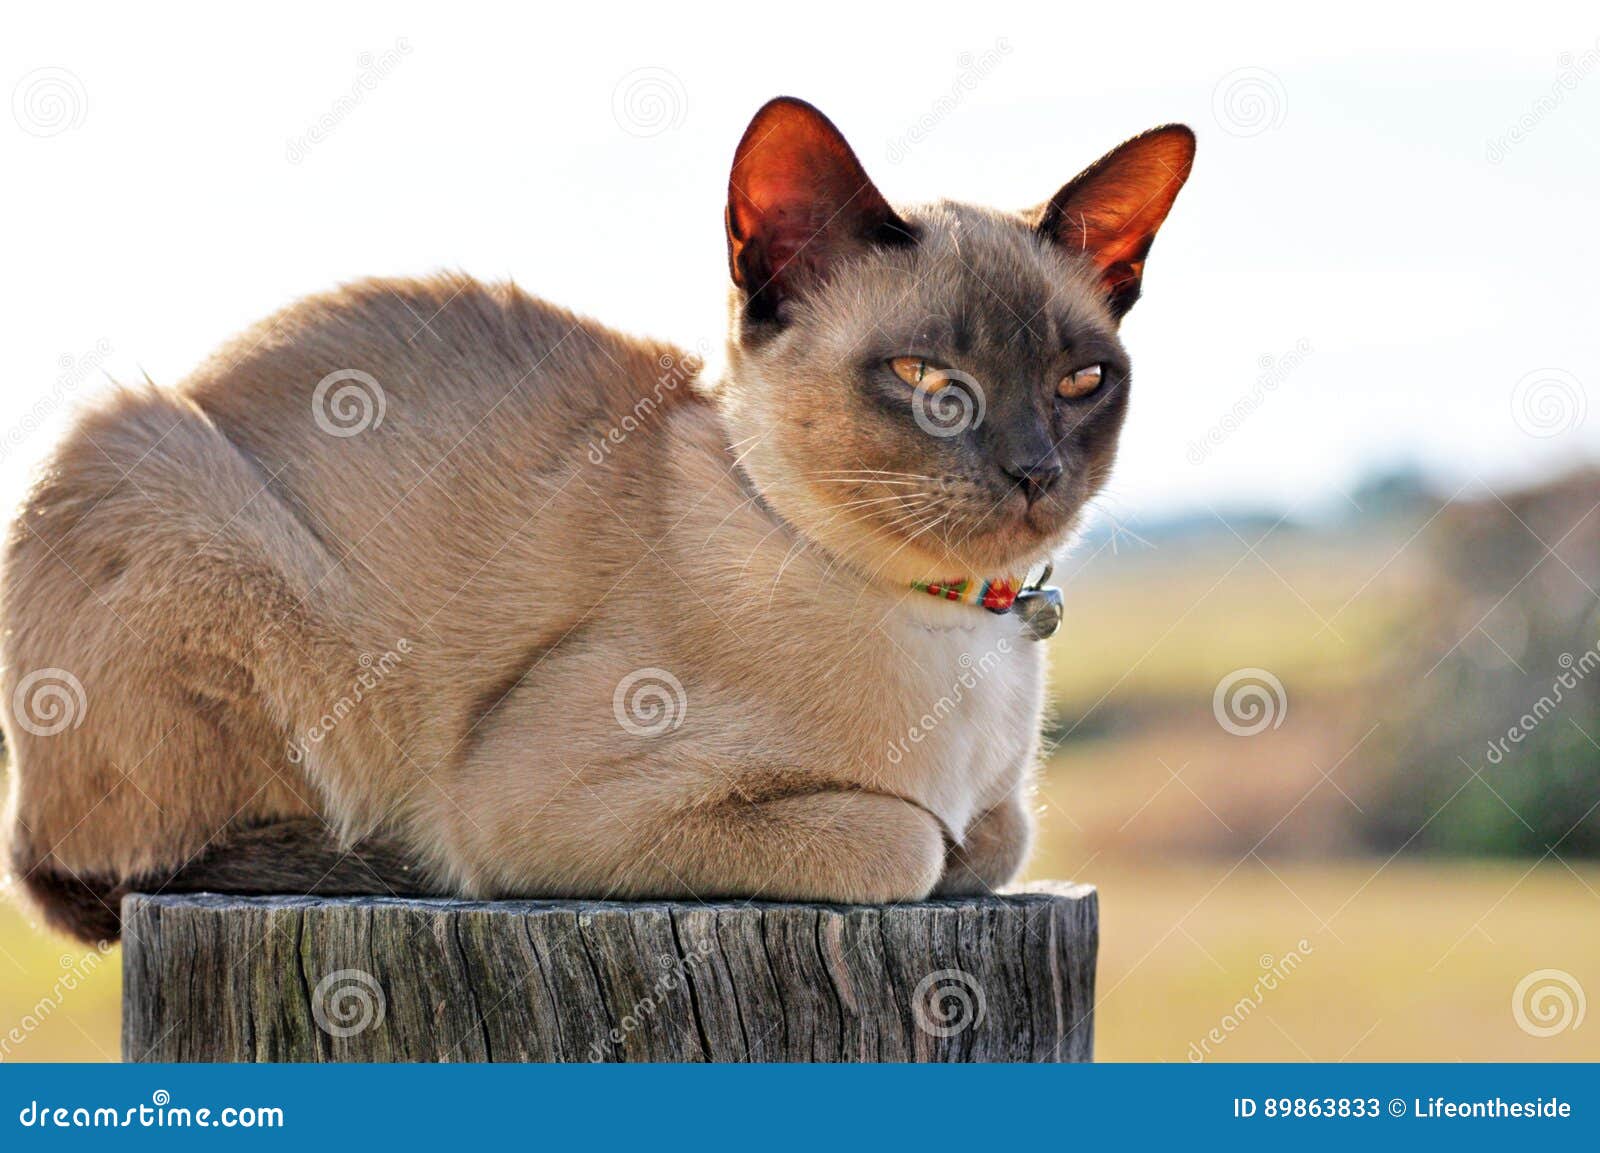 farm cat perched on fence post